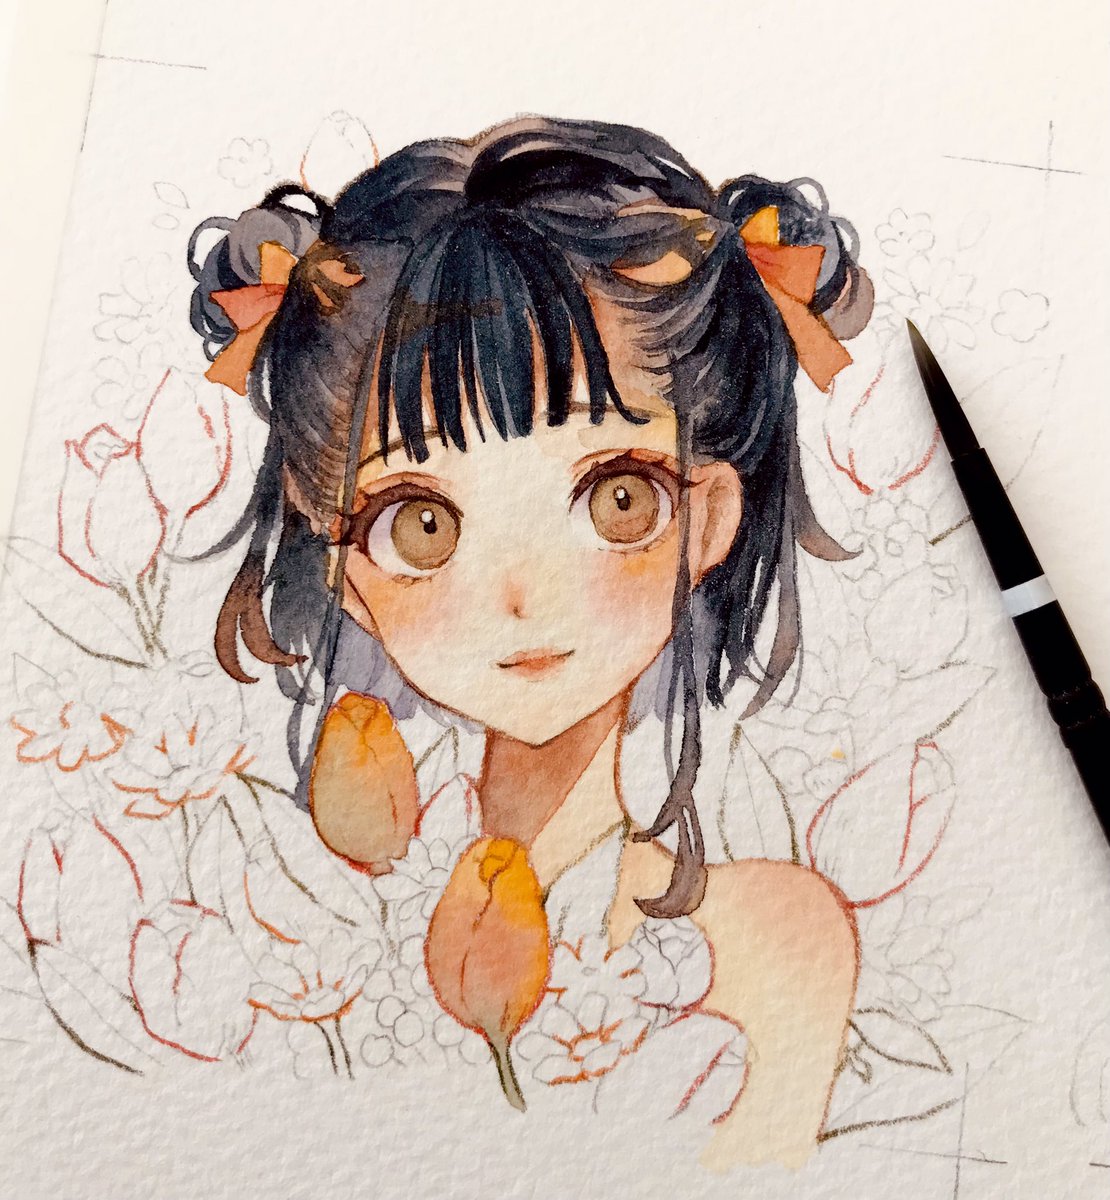 「WIP🌷 」|ゆゆはる🌸のイラスト